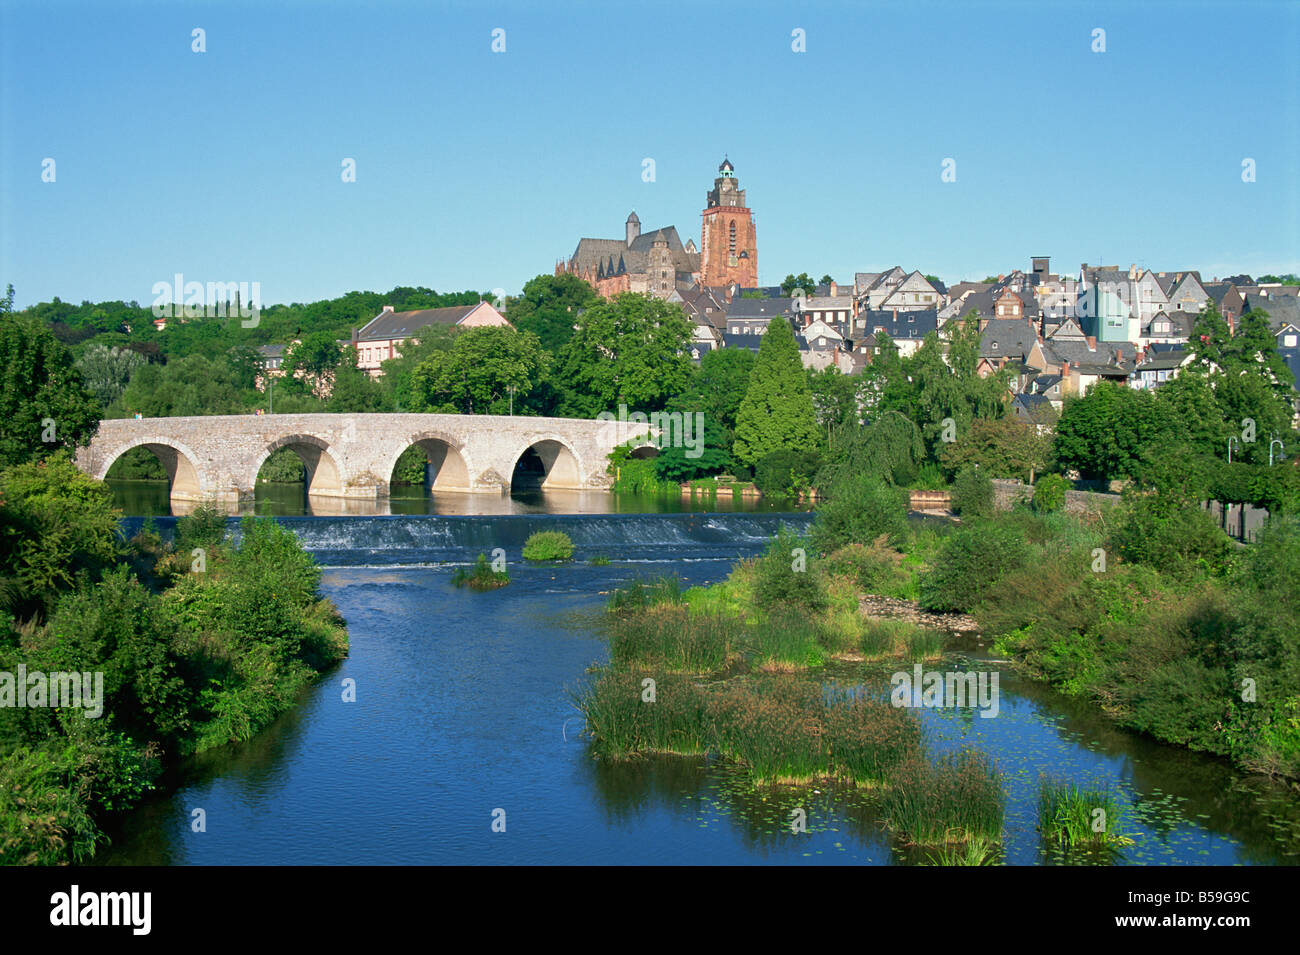 River Lahn, old town and cathedral, Wetzlar, Hesse, Germany, Europe Stock Photo